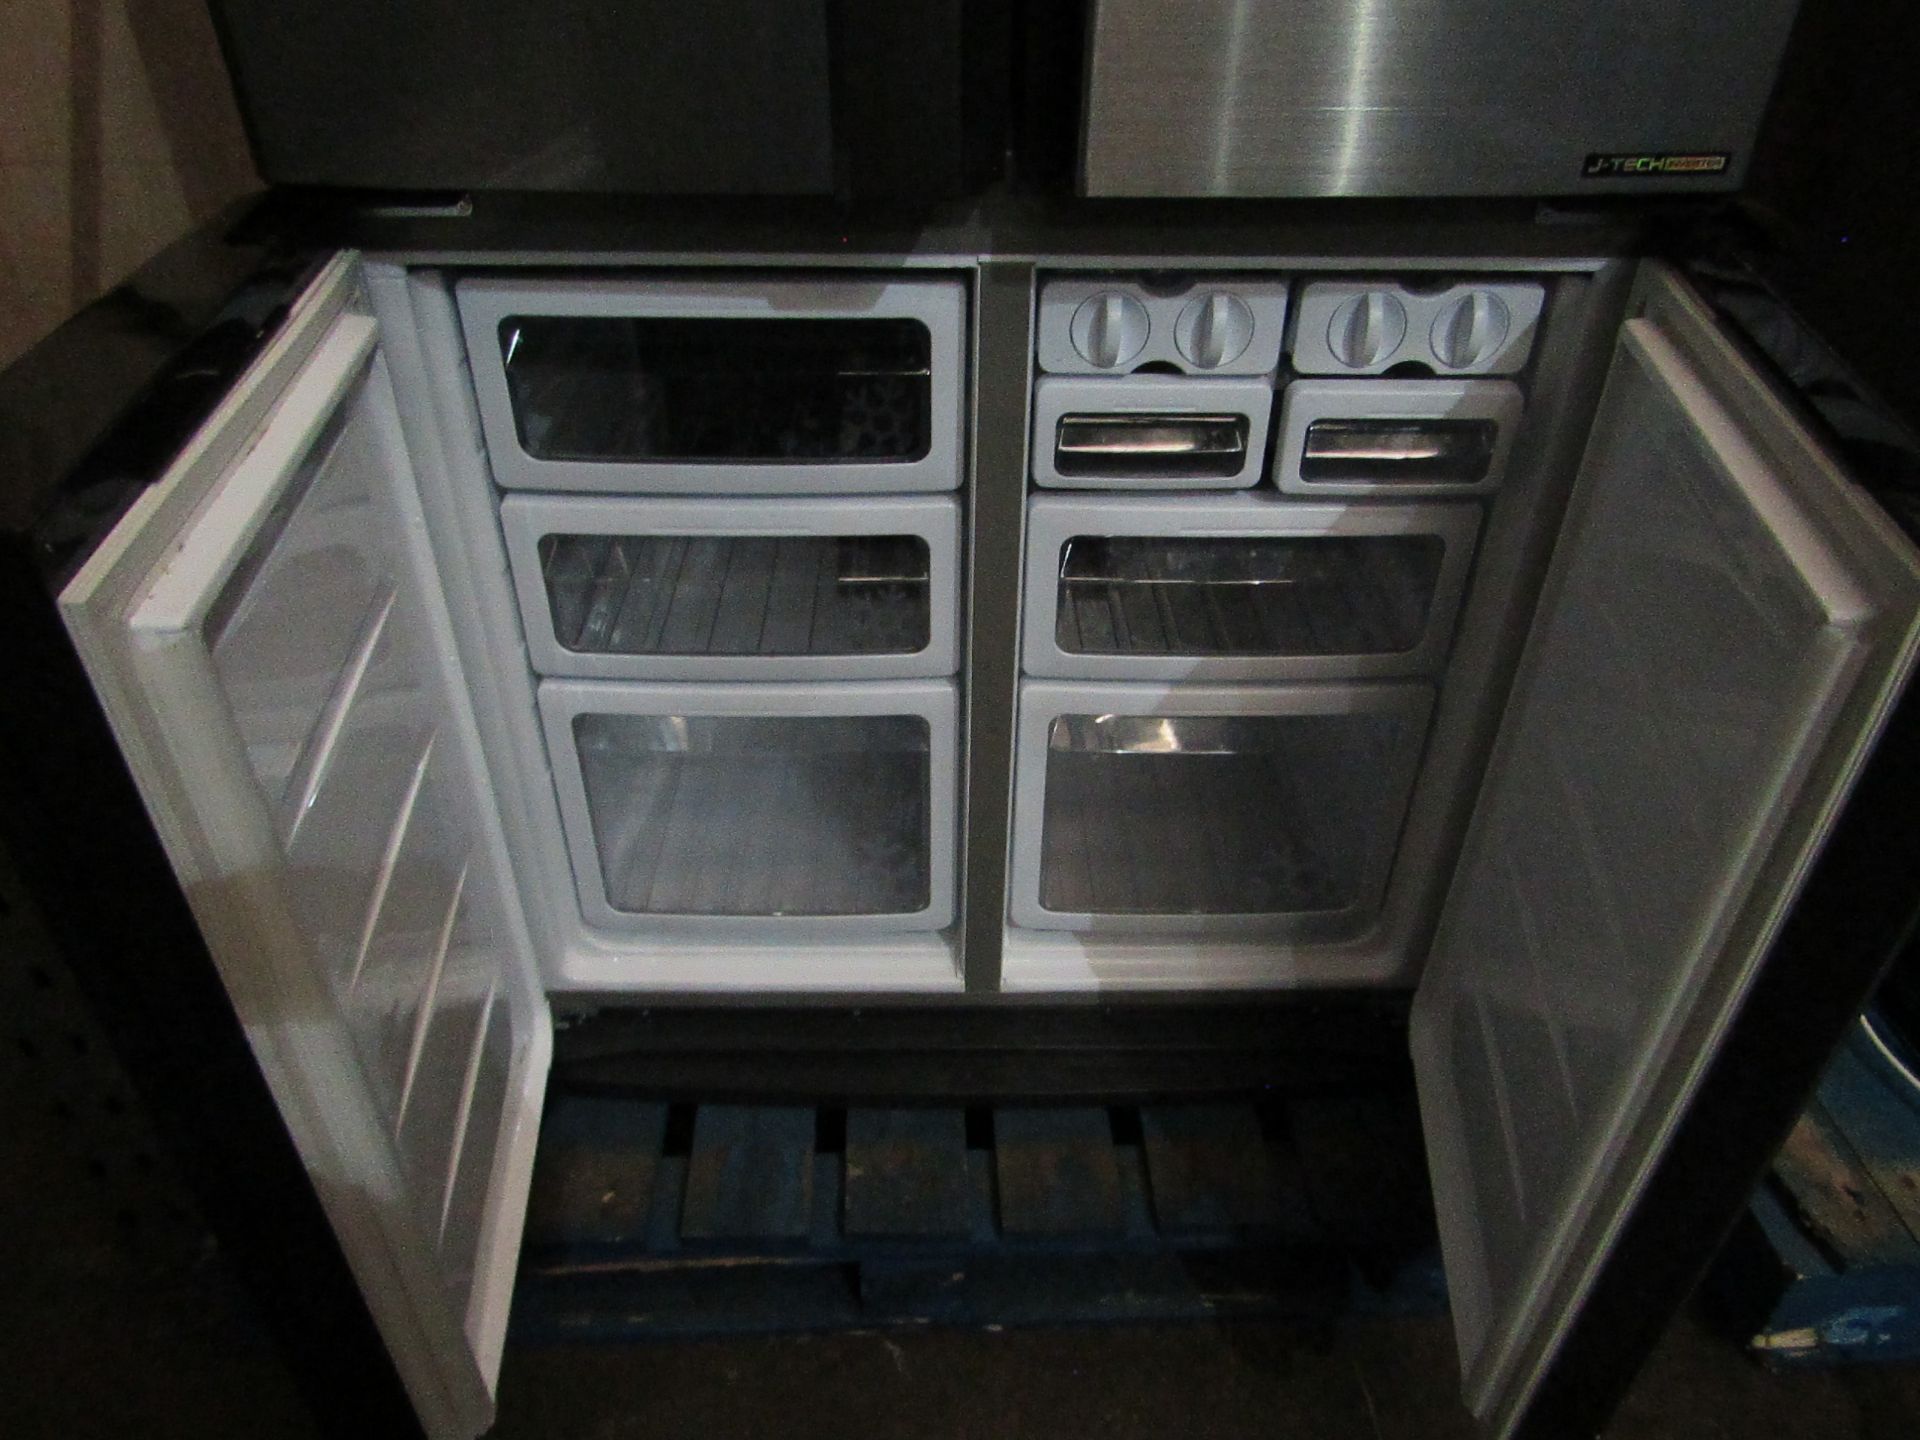 Sharp SJ-EX820F2 4 door American style fridge freezer, powers on and gets cold in both fridge and - Image 3 of 3